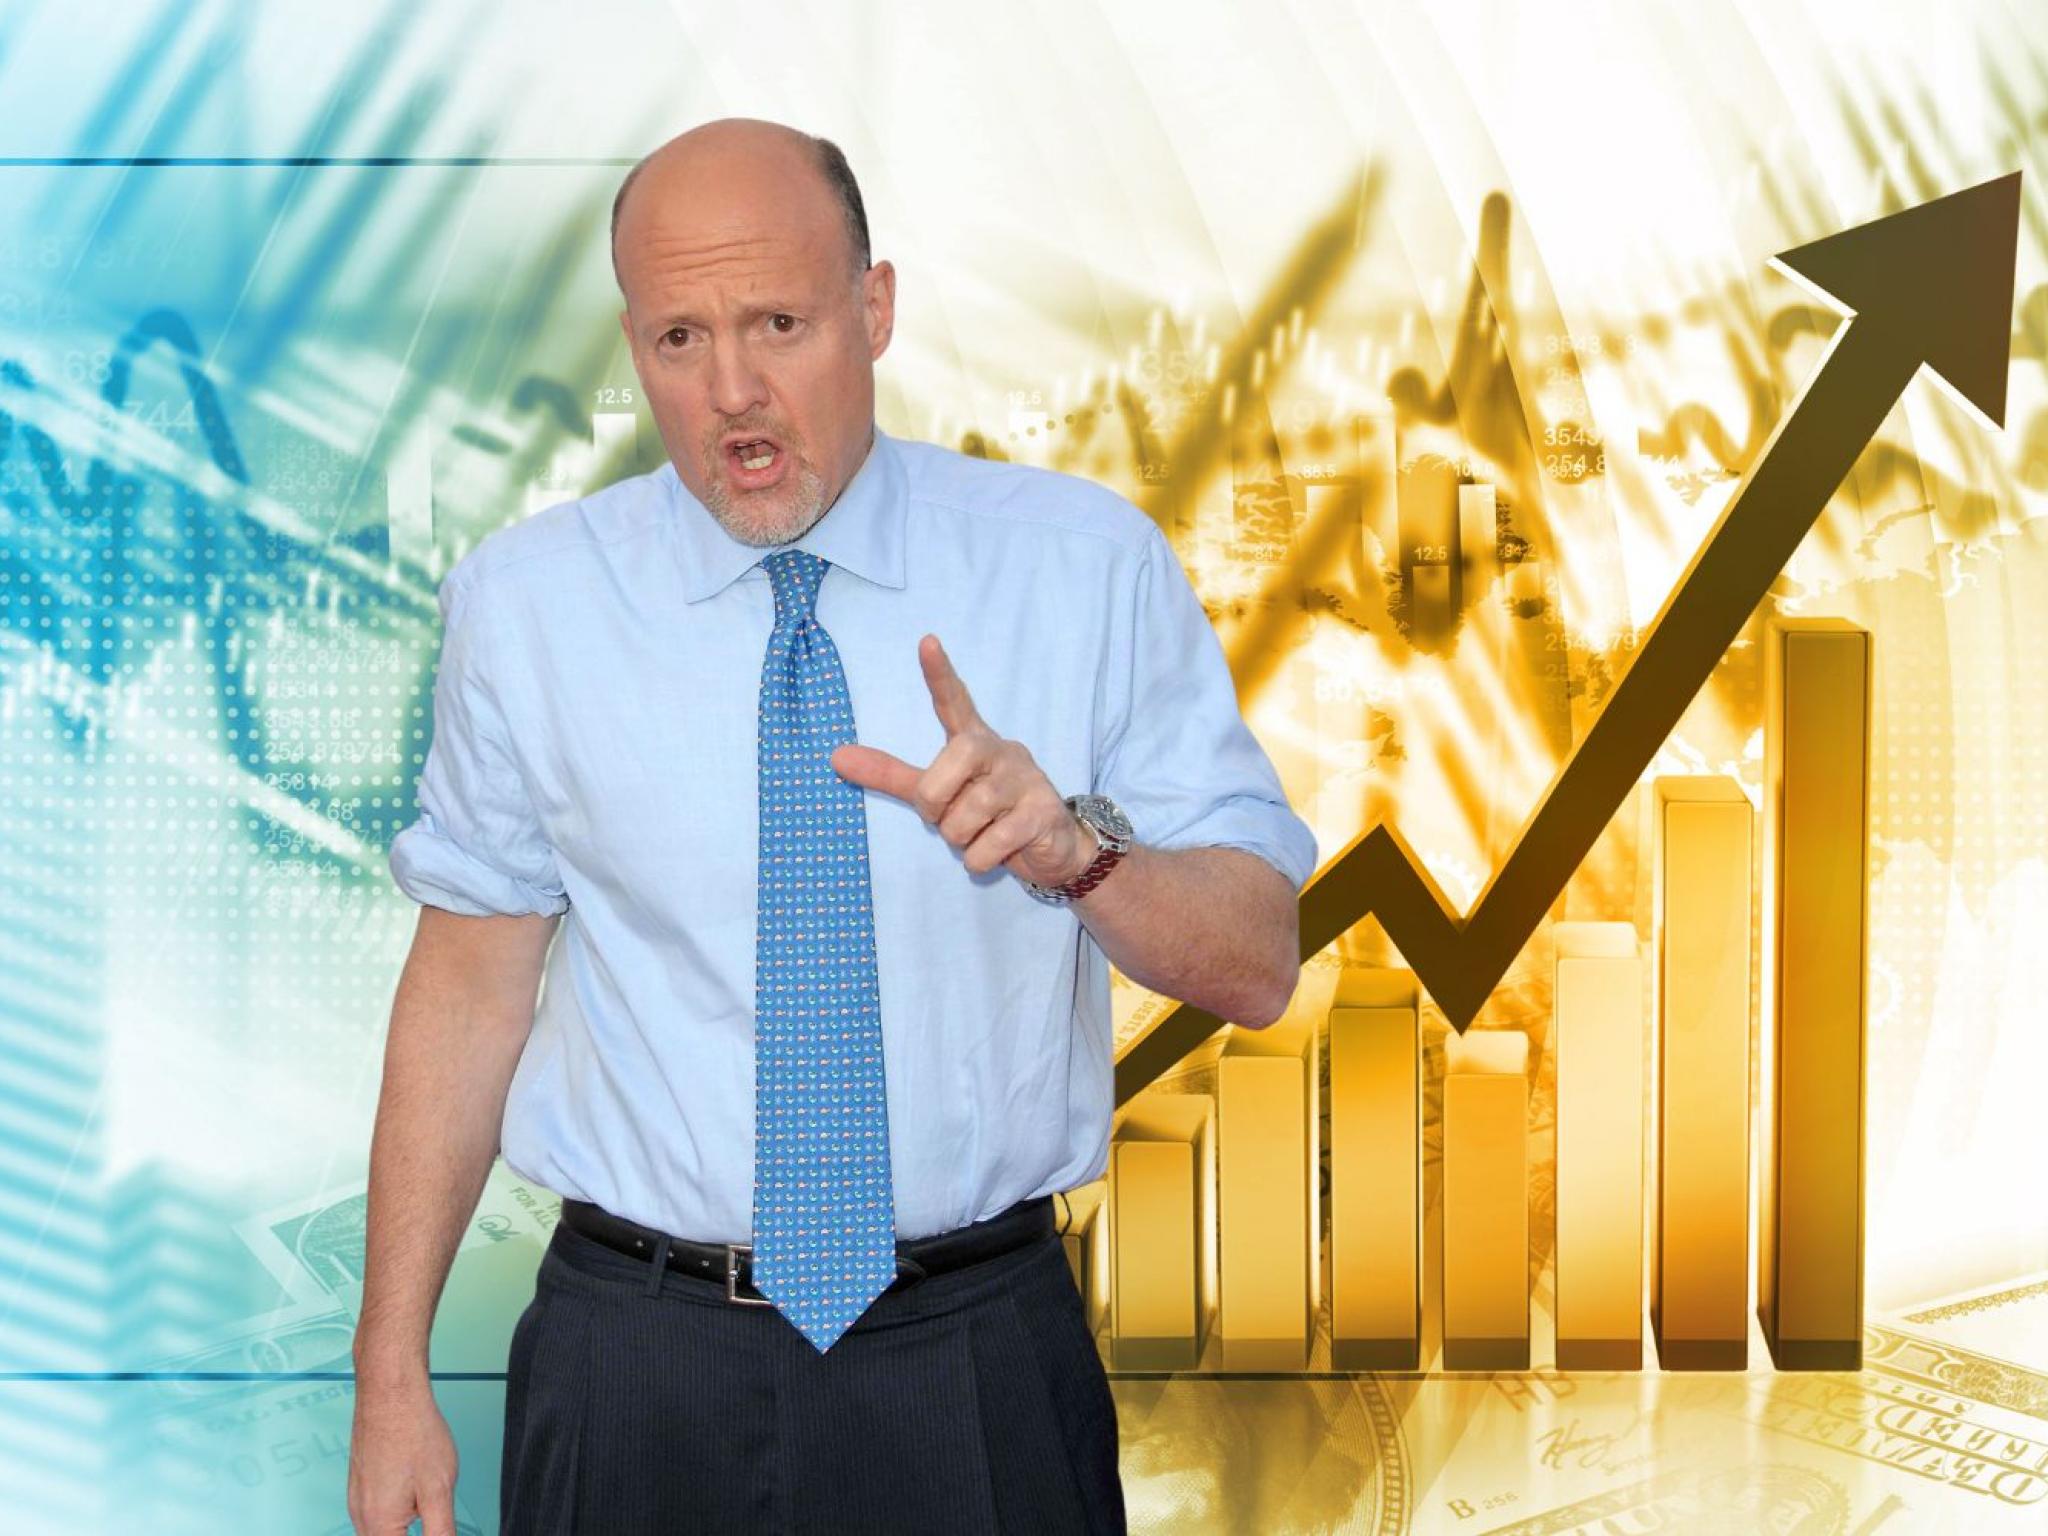  buy-some-here-and-then-you-buy-some-if-it-comes-lower-jim-cramer-on-this-stock-up-over-50-ytd 